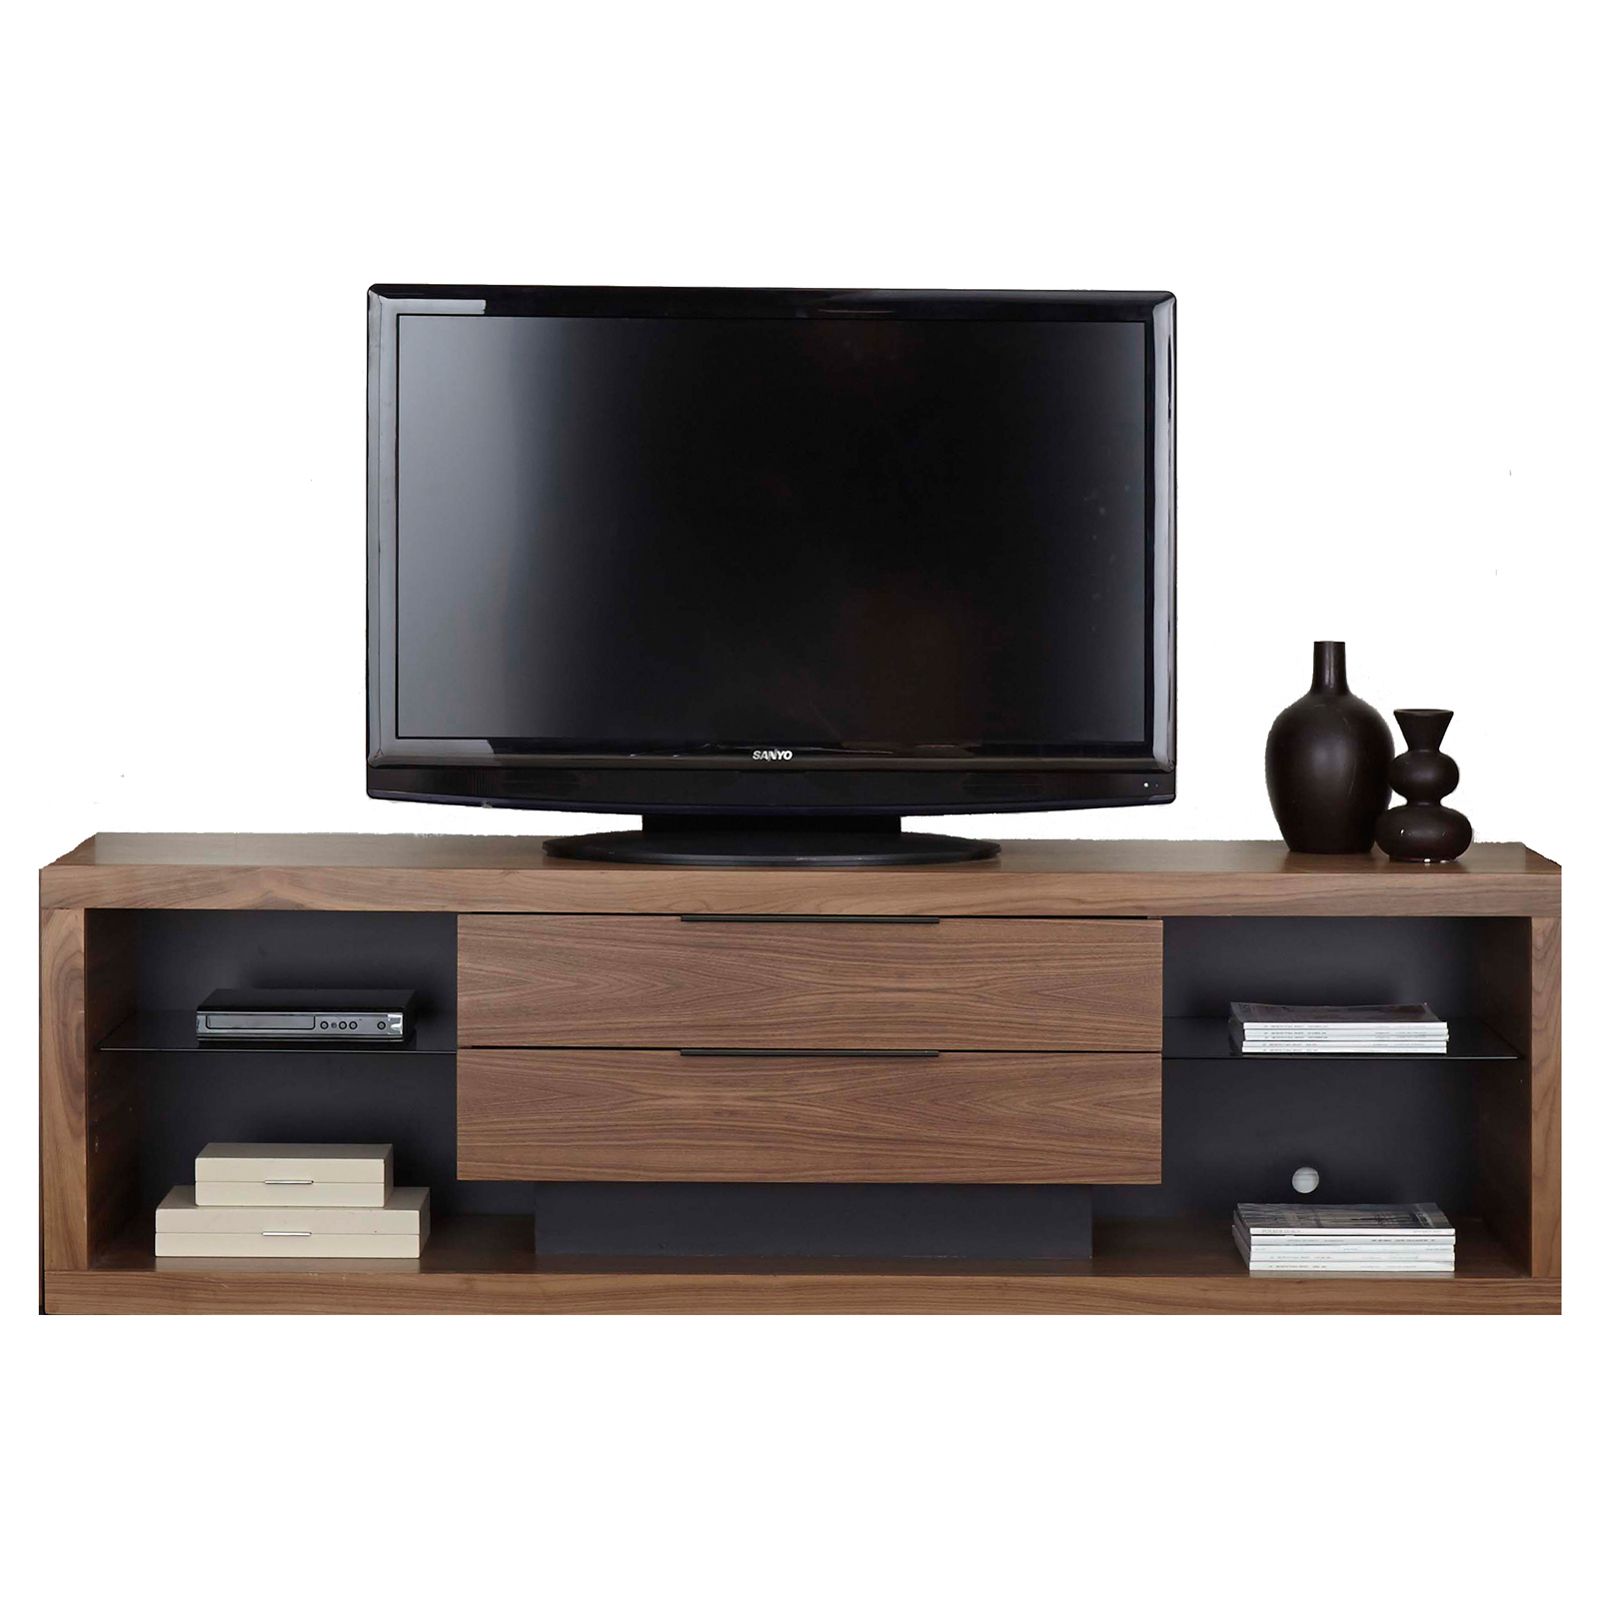 Stratus 80 Inch Tv Standmartin Home Furnishings Inside Deco Wide Tv Stands (View 9 of 15)